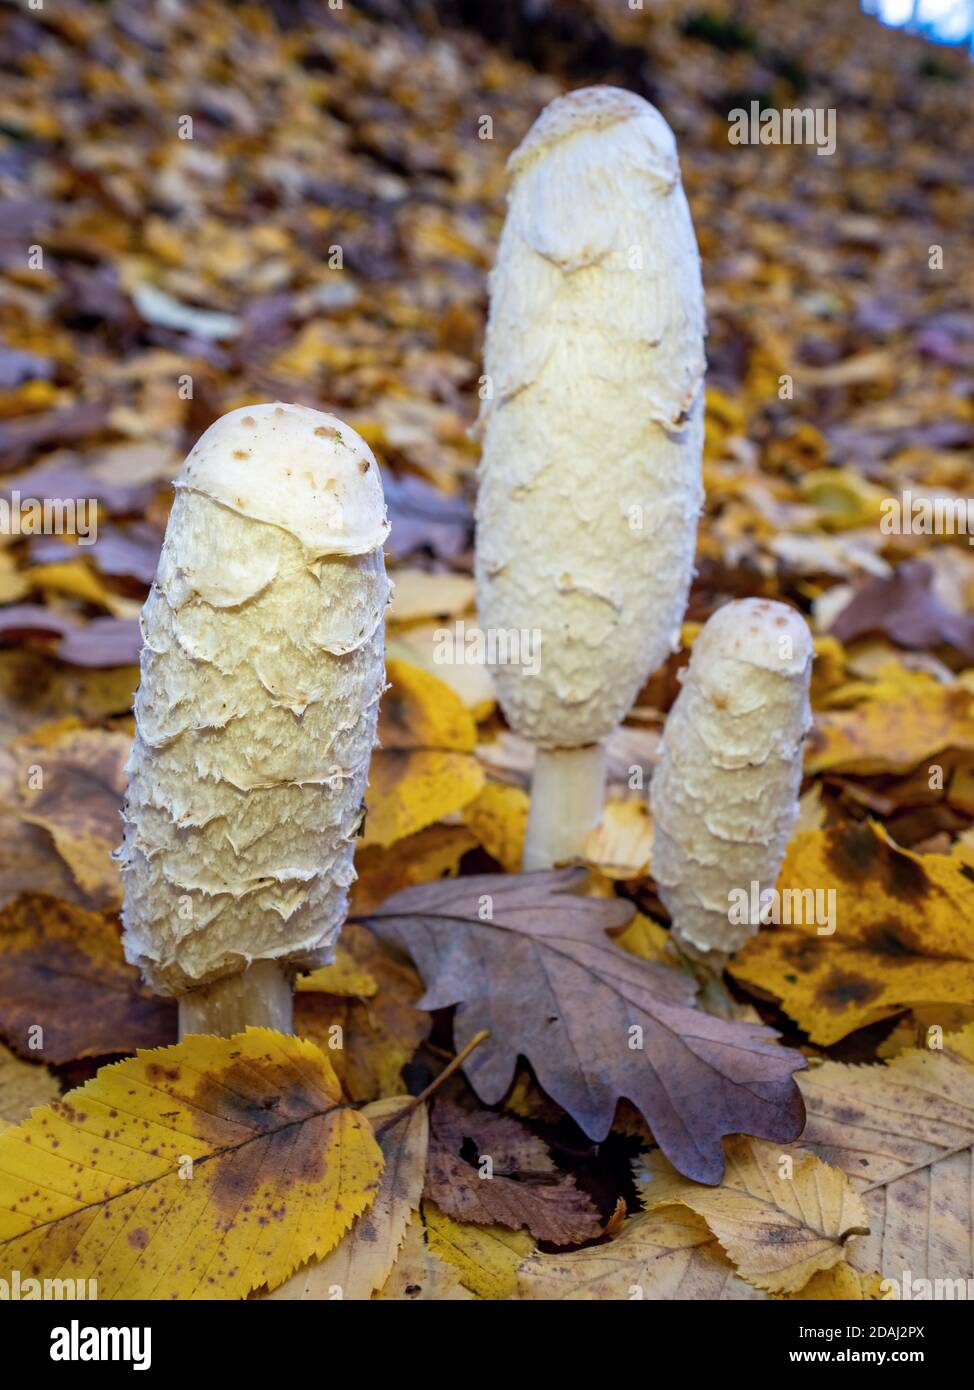 Group of young edible shaggy ink cap or lawyer's wig or shaggy mane. Common autumnal fungus. Tasty young mushroom found in colorful leaves Stock Photo